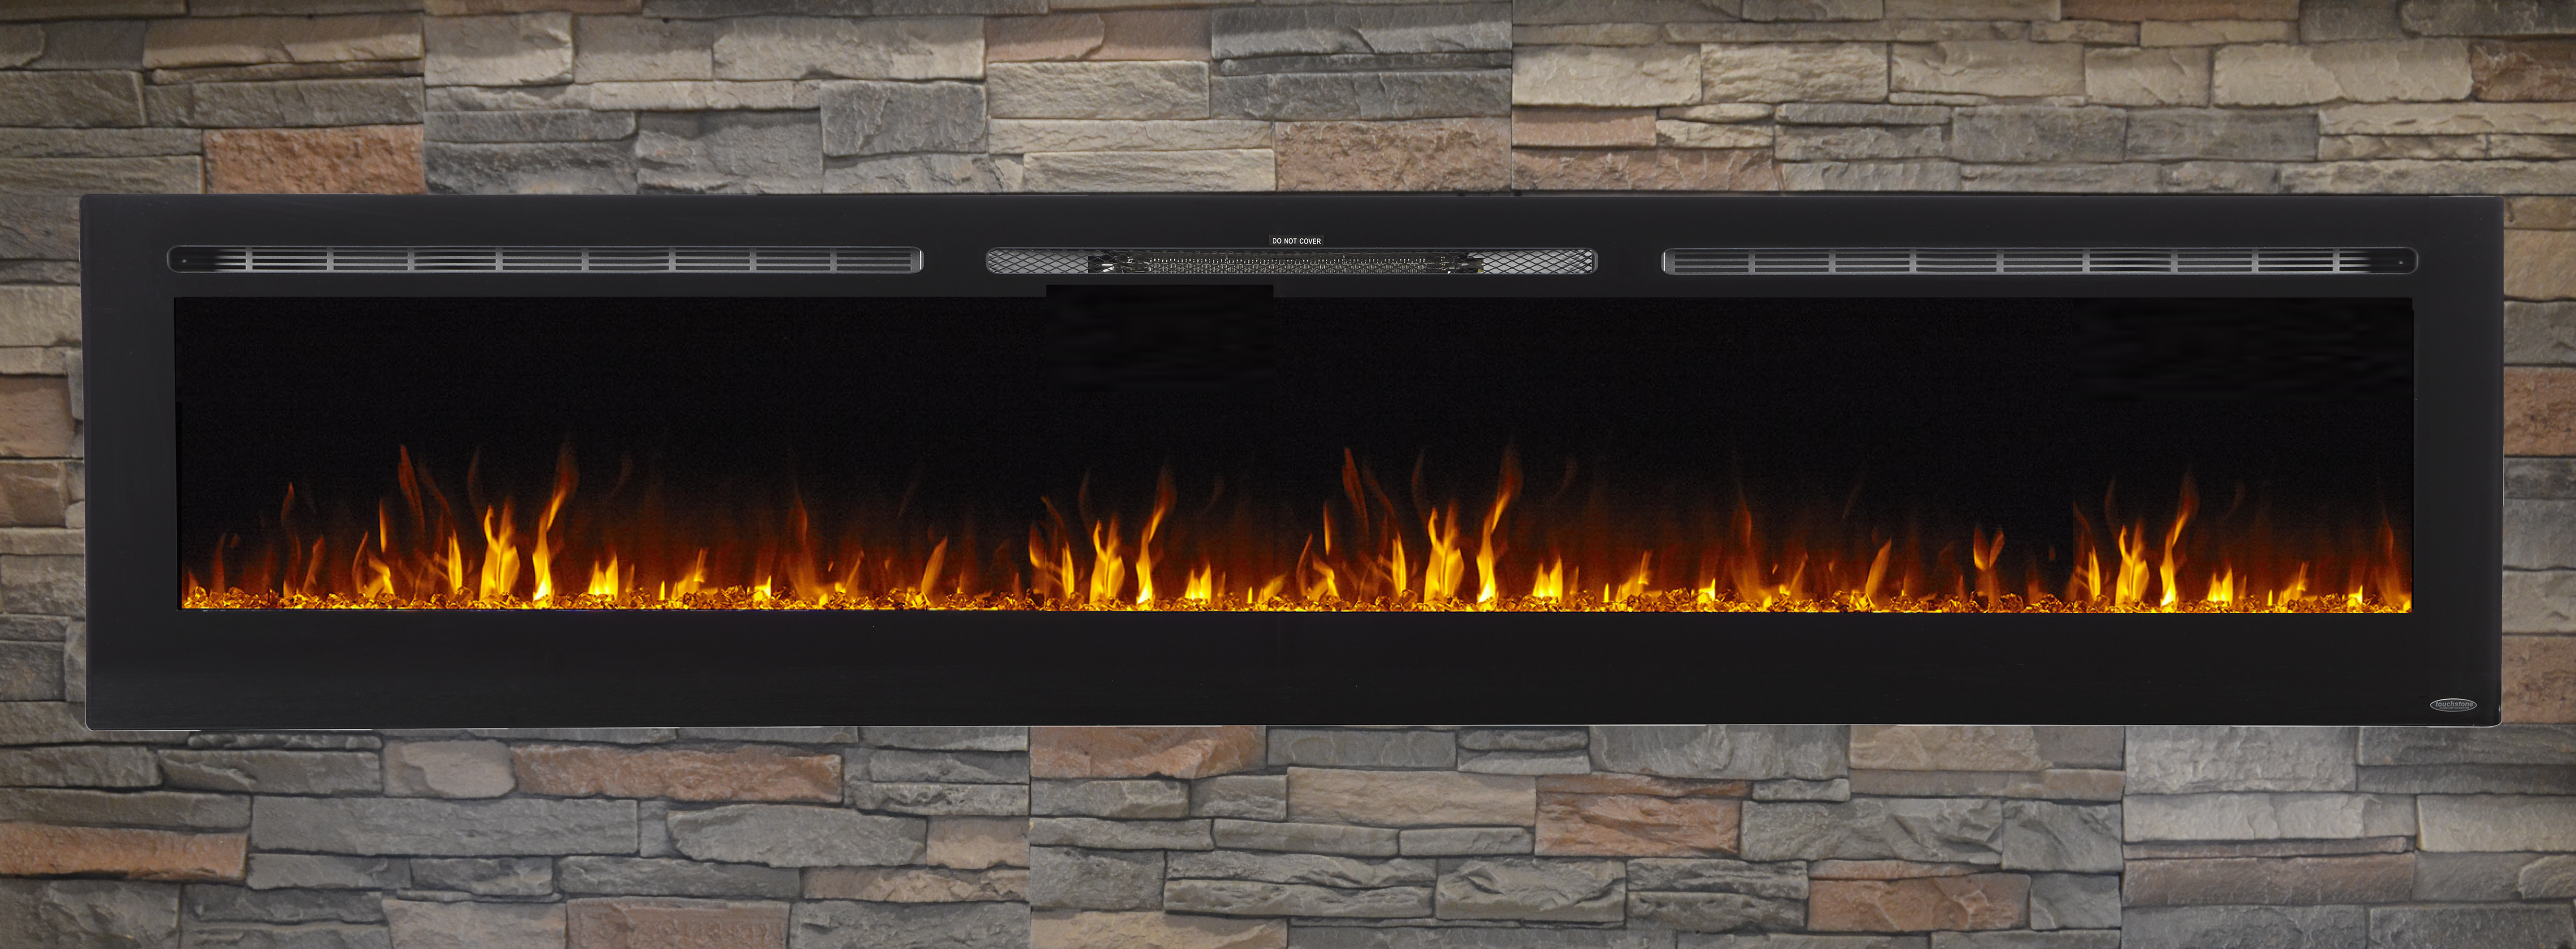 	Sideline 100 80032 100 inches Recessed Electric Fireplace orange flames.